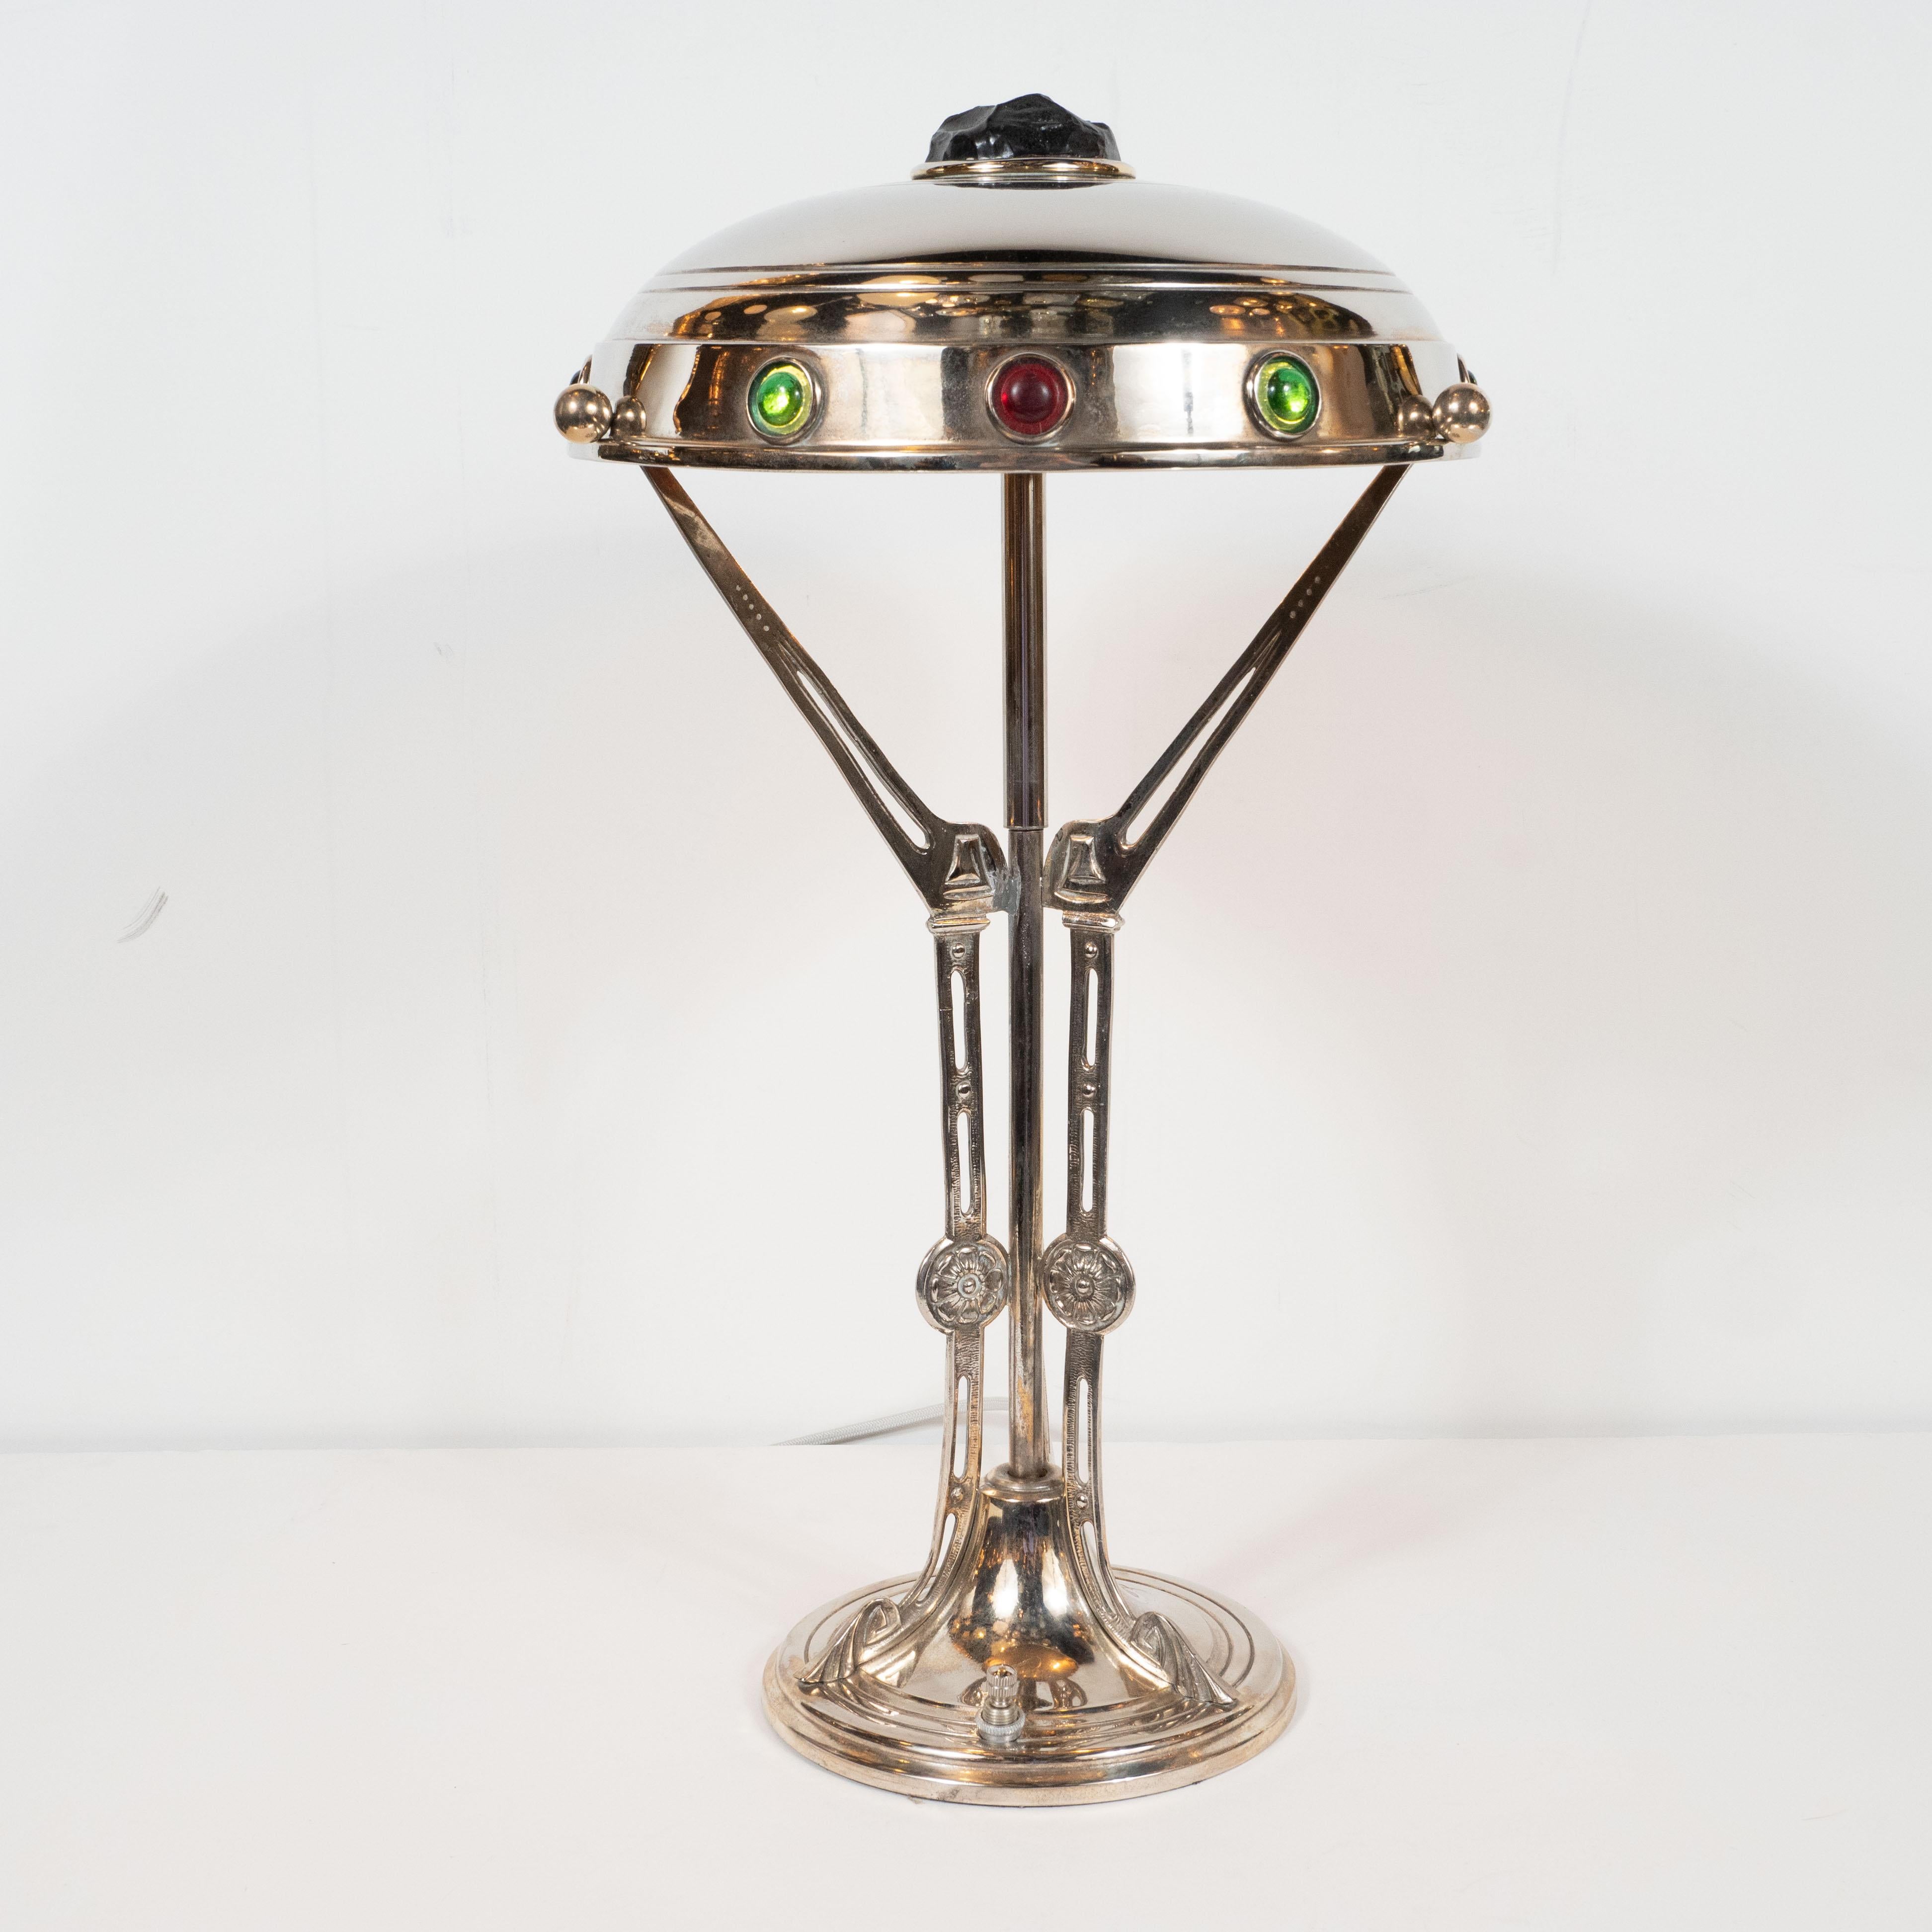 This stunning and dramatic table lamp was realized in Austria, circa 1920. This gorgeous piece features highly sculptural and beautifully crafted supports rising from a subtly domed and banded base- all realized in lustrous nickel. The domed shade